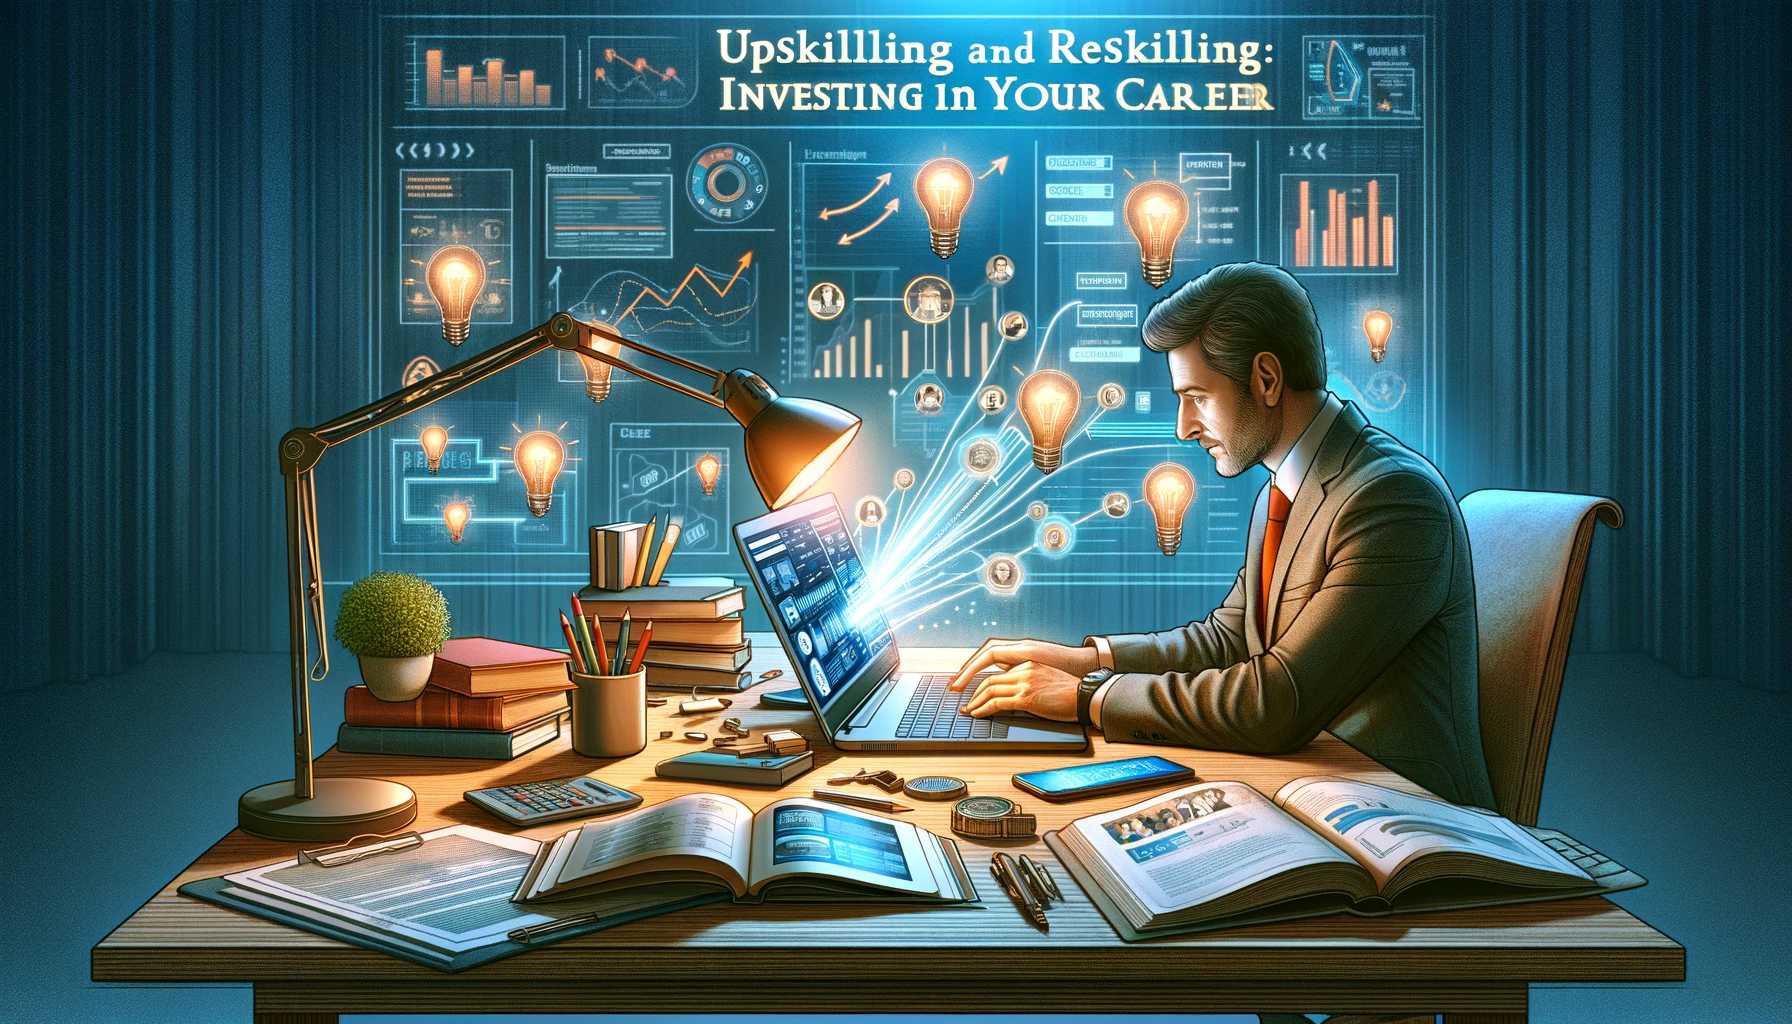 Upskilling and Reskilling: Investing in Your Career